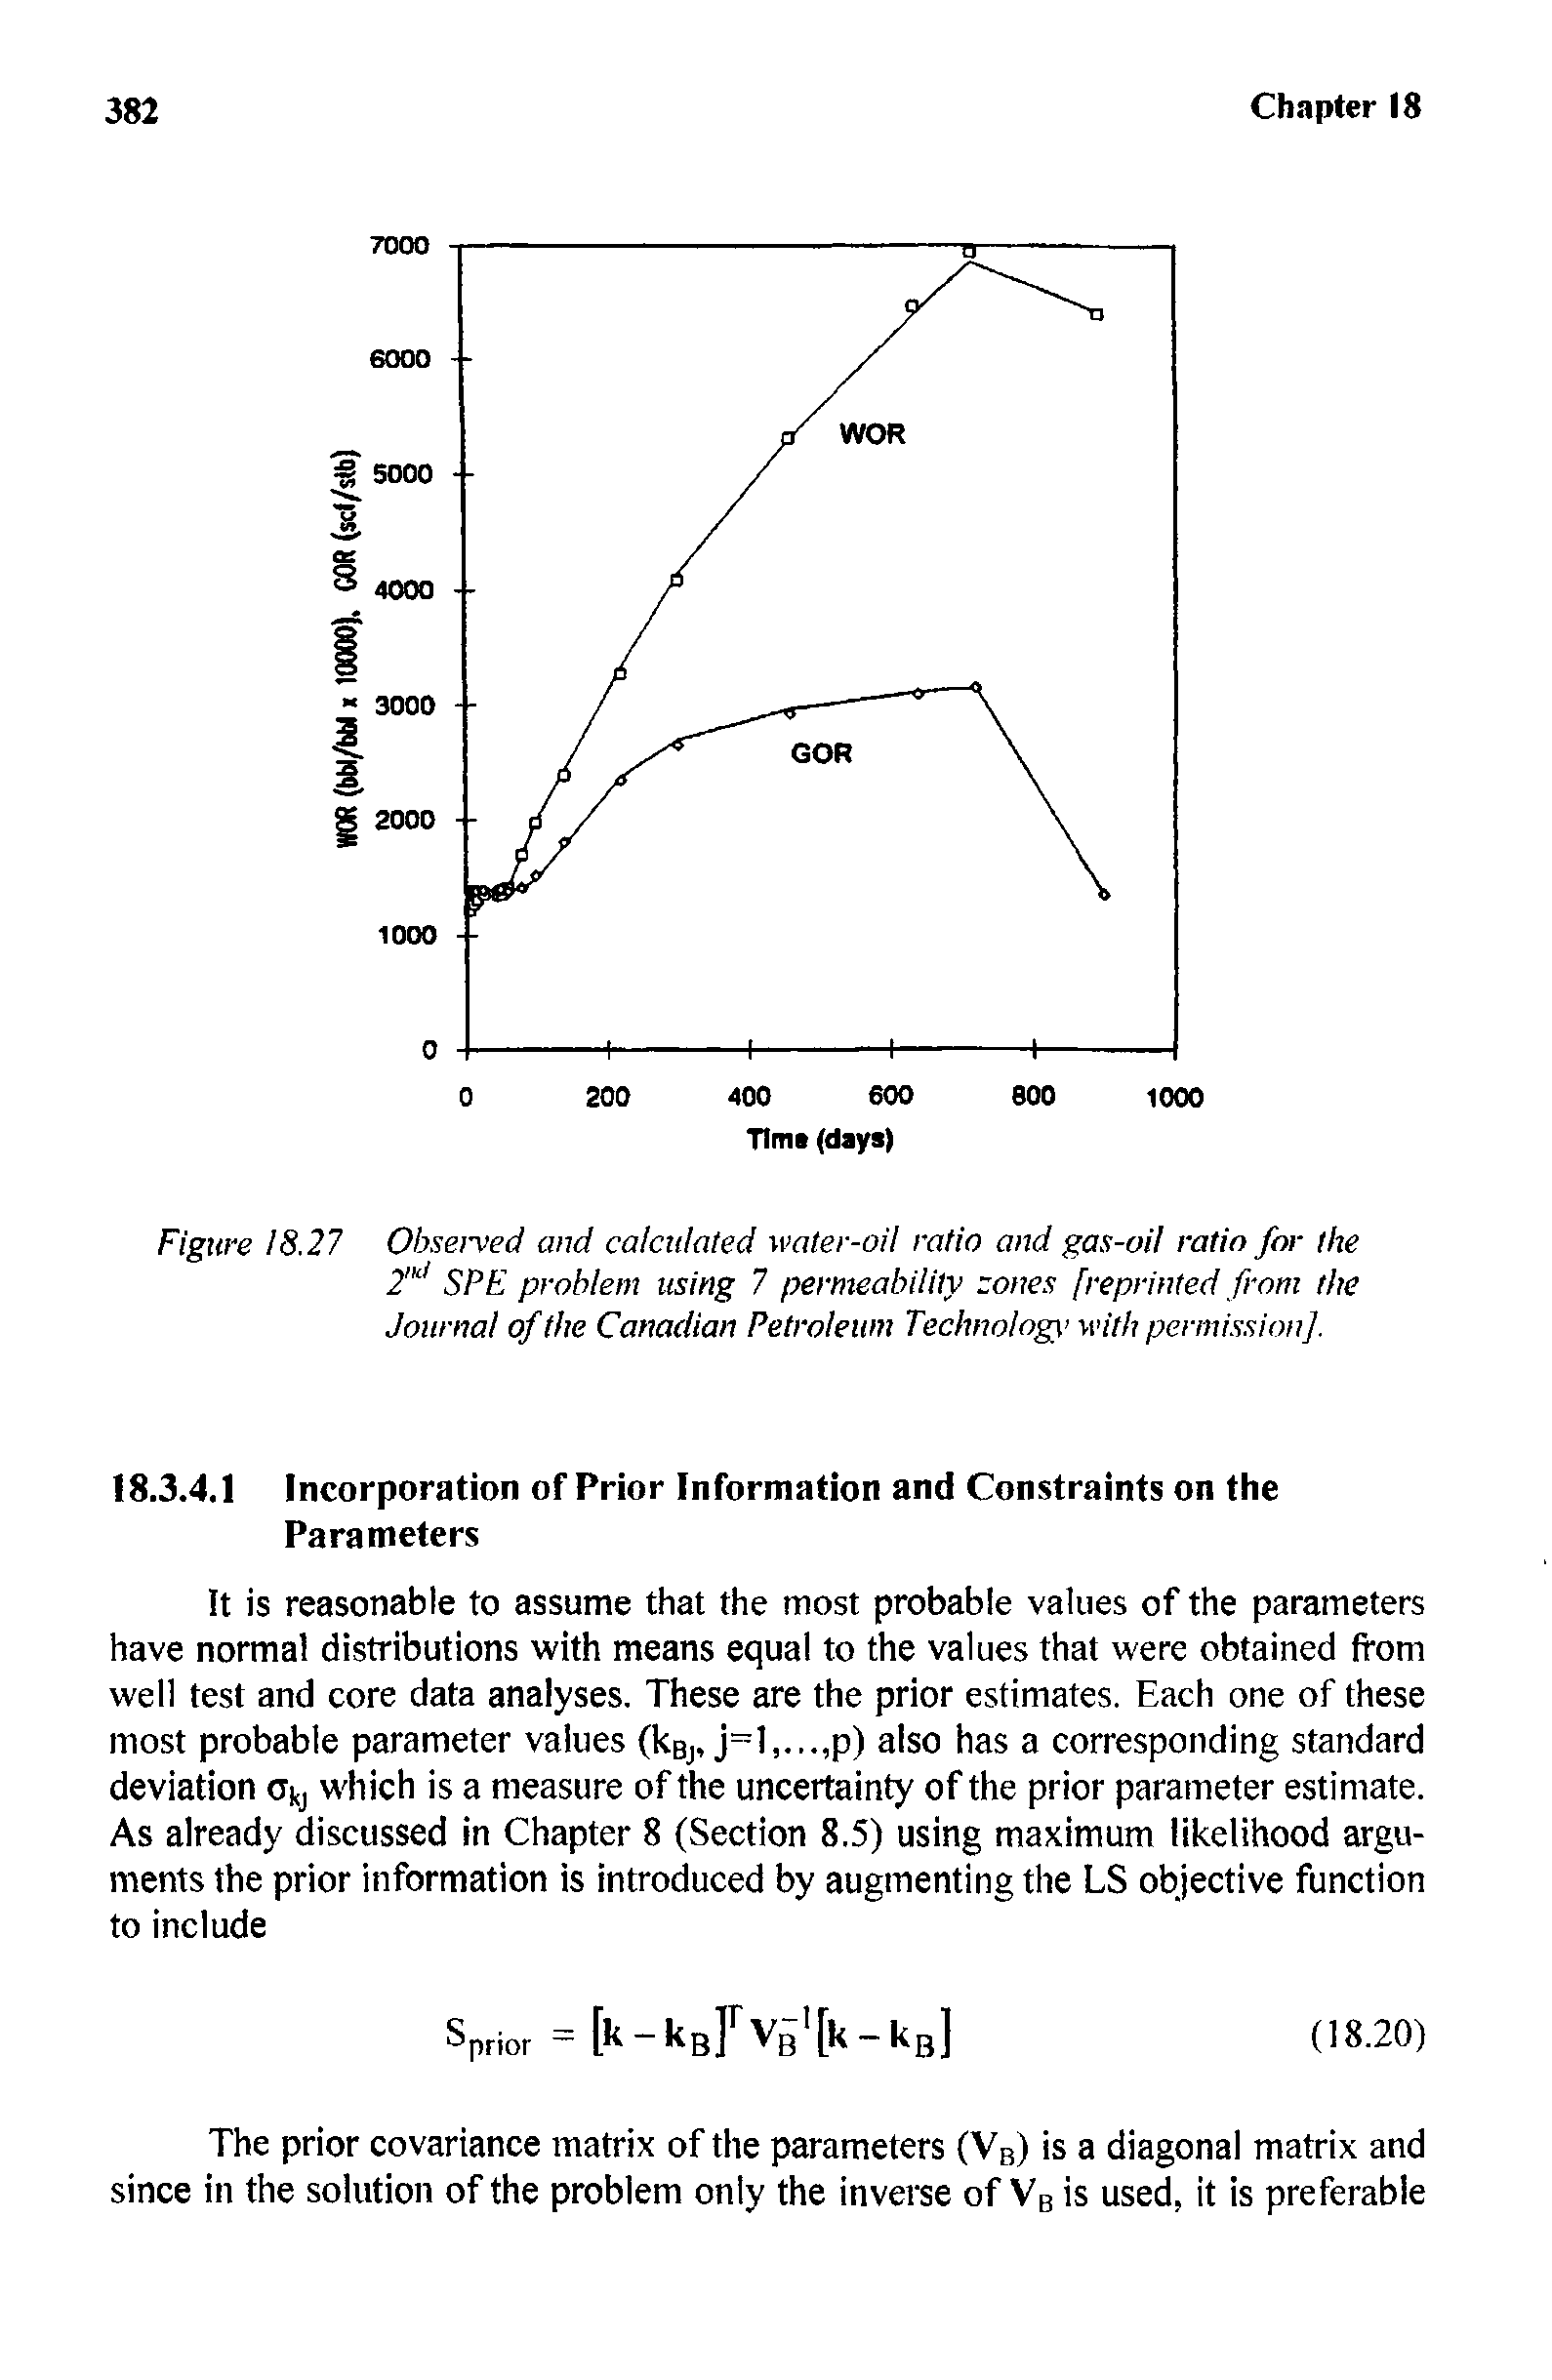 Figure 18.27 Observed and calculated water-oil ratio and gas-oil ratio for the SPE problem using 7 permeability zones [reprinted from the Journal of the Canadian Petroleum Technology with permission].